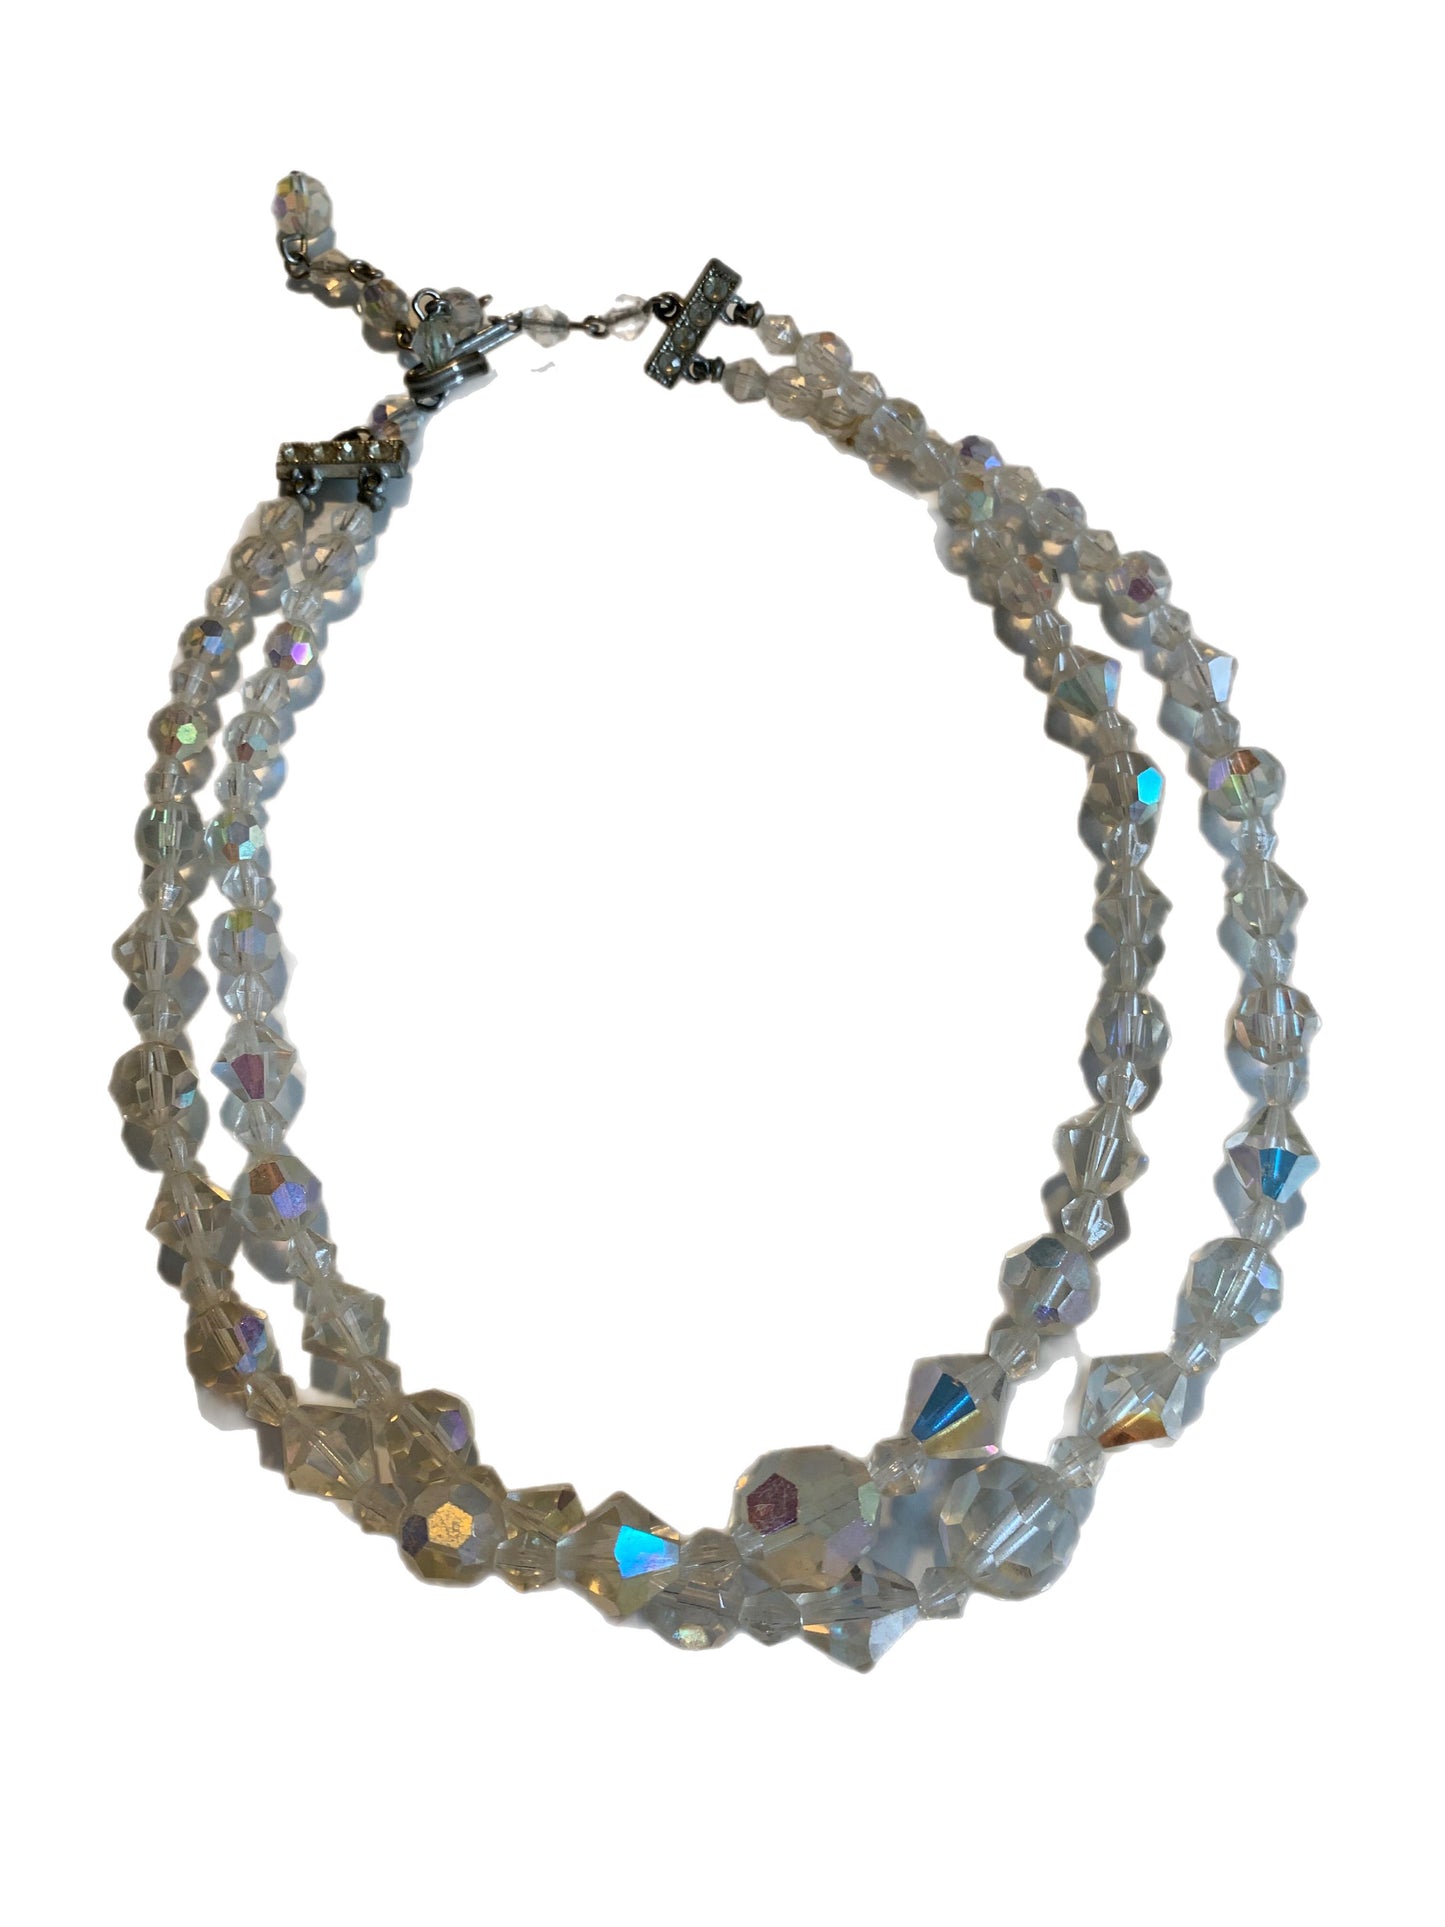 Beveled Crystal Bead Double Strand Necklace circa 1960s